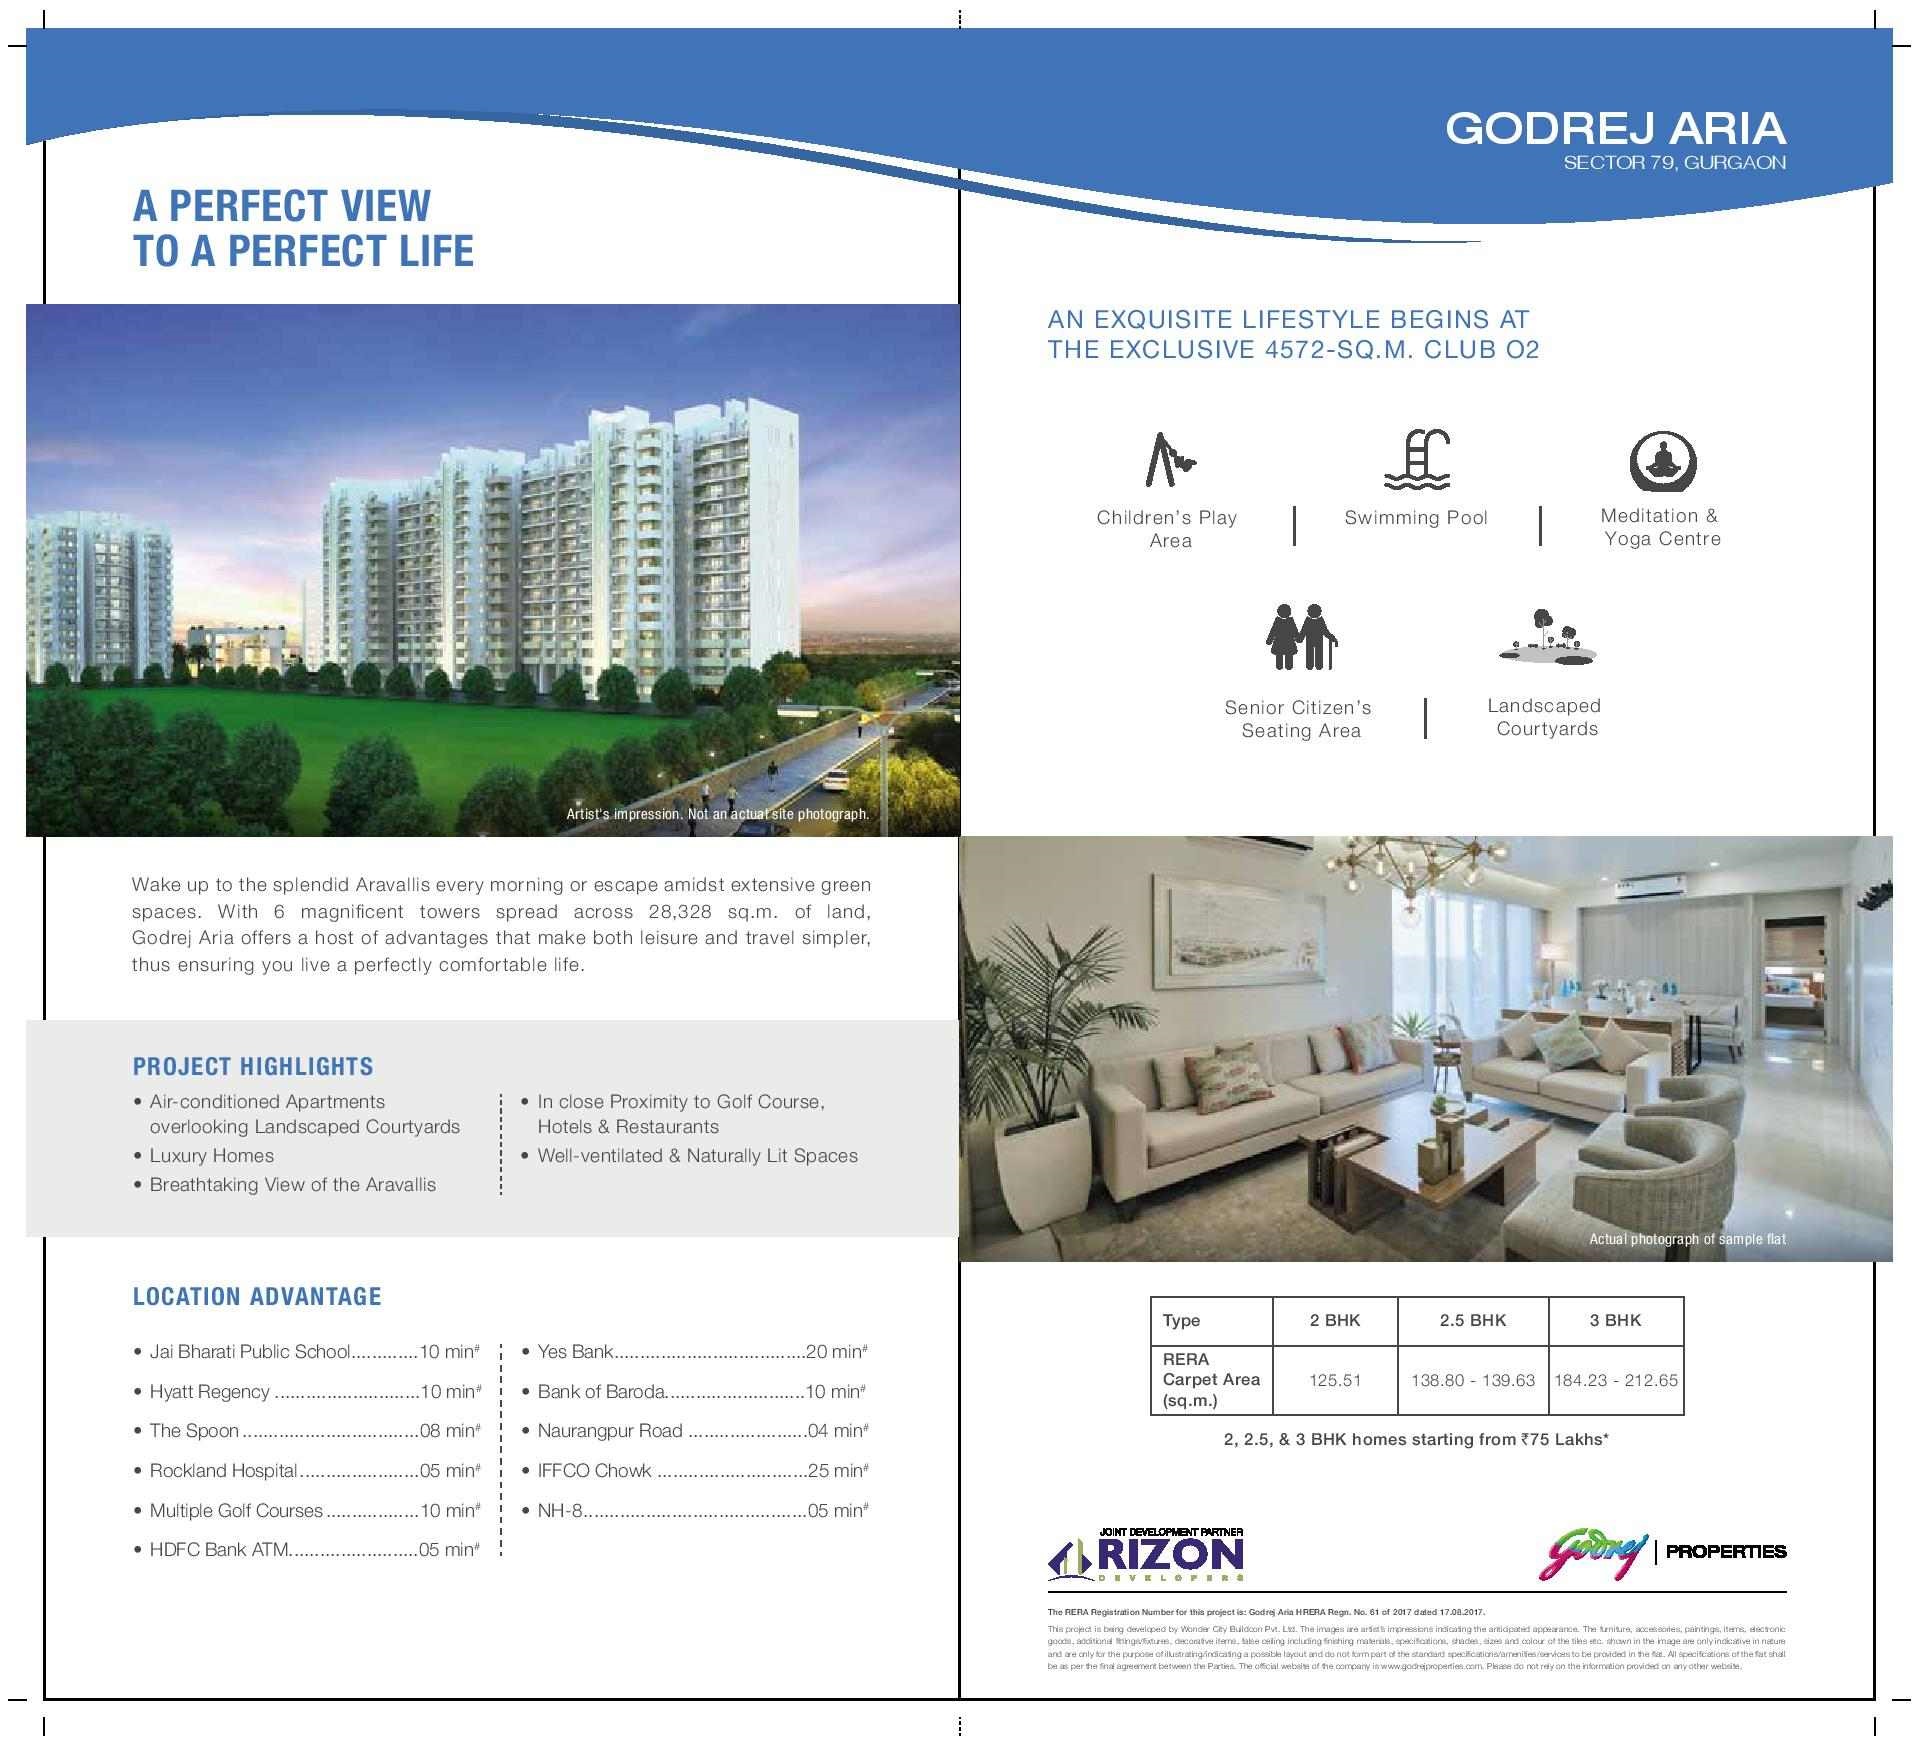 Own a home at Rs.9999 per month with Happy EMI at Godrej Aria in Gurgaon Update